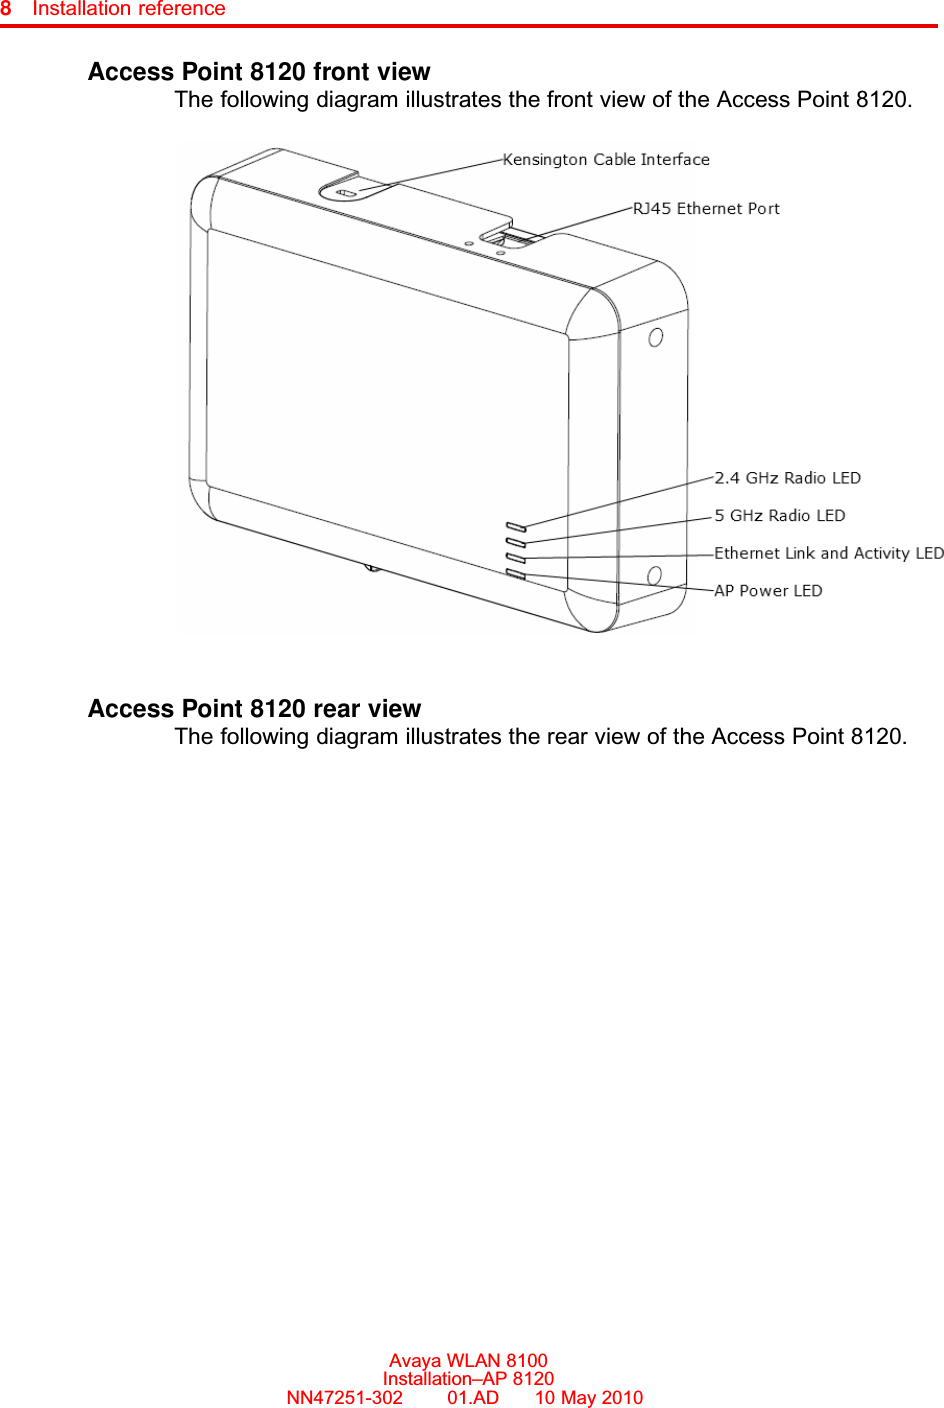 8Installation referenceAccess Point 8120 front viewThe following diagram illustrates the front view of the Access Point 8120.Access Point 8120 rear viewThe following diagram illustrates the rear view of the Access Point 8120.Avaya WLAN 8100Installation–AP 8120NN47251-302      01.AD      10 May 2010.